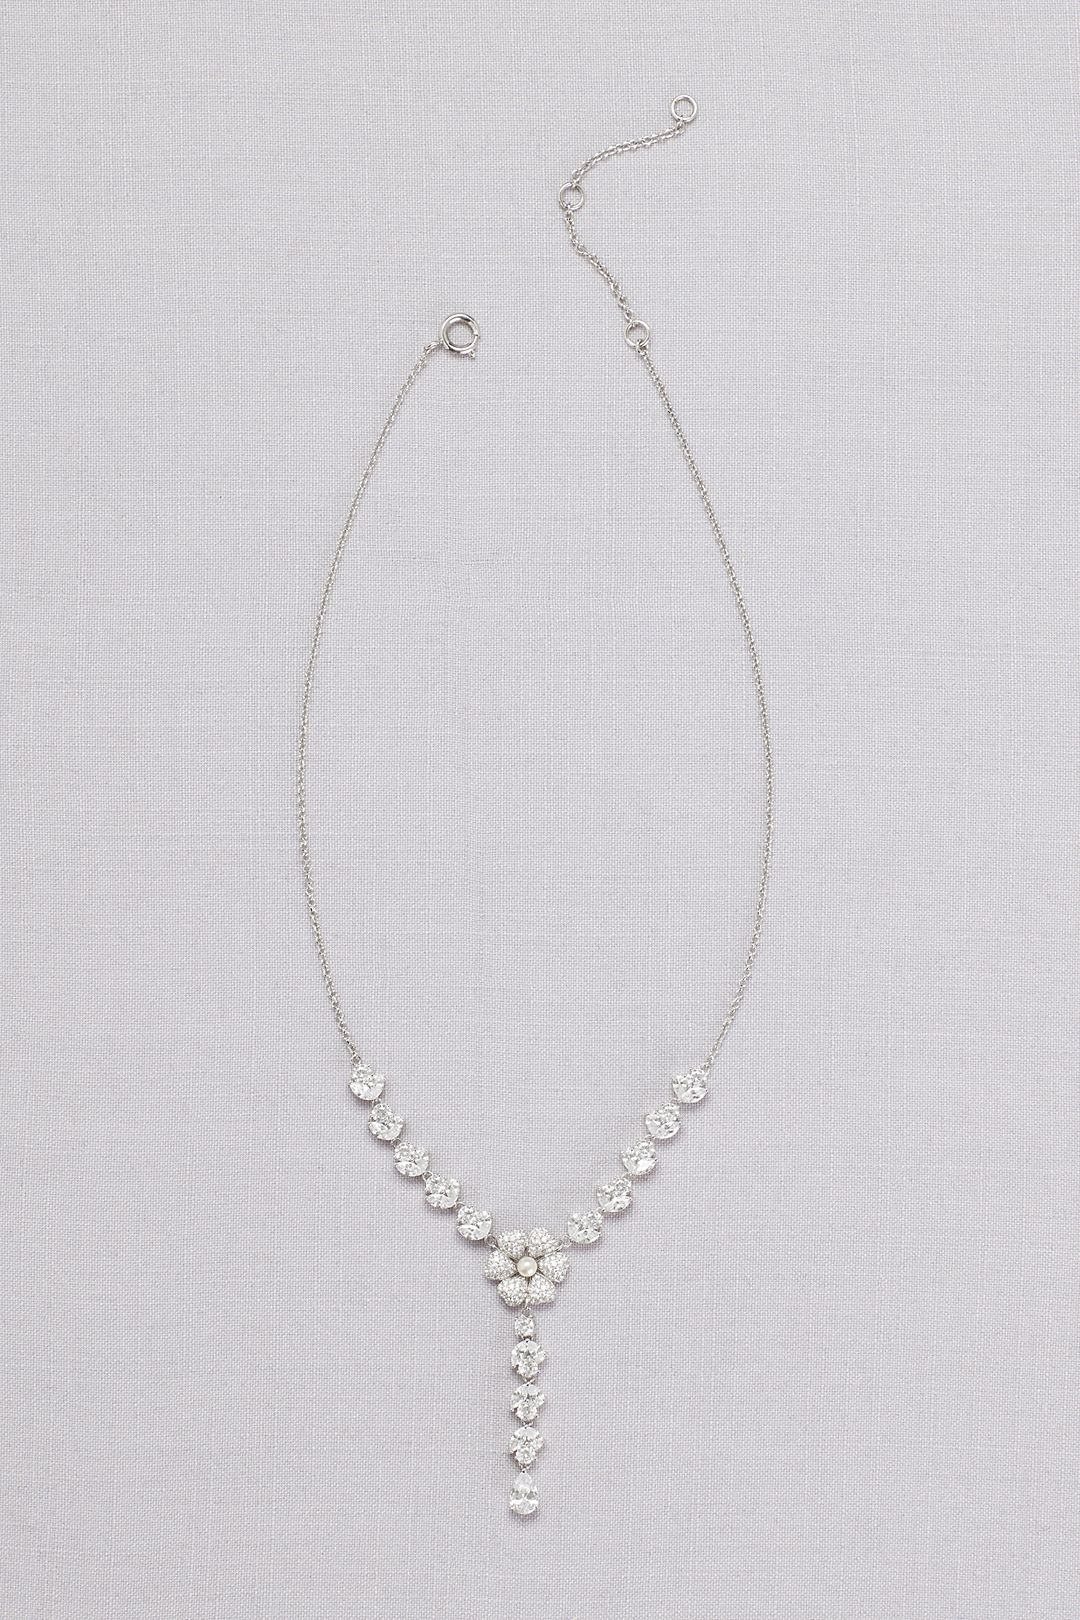  Y-Neck Crystal-Dusted Flower Necklace Image 1